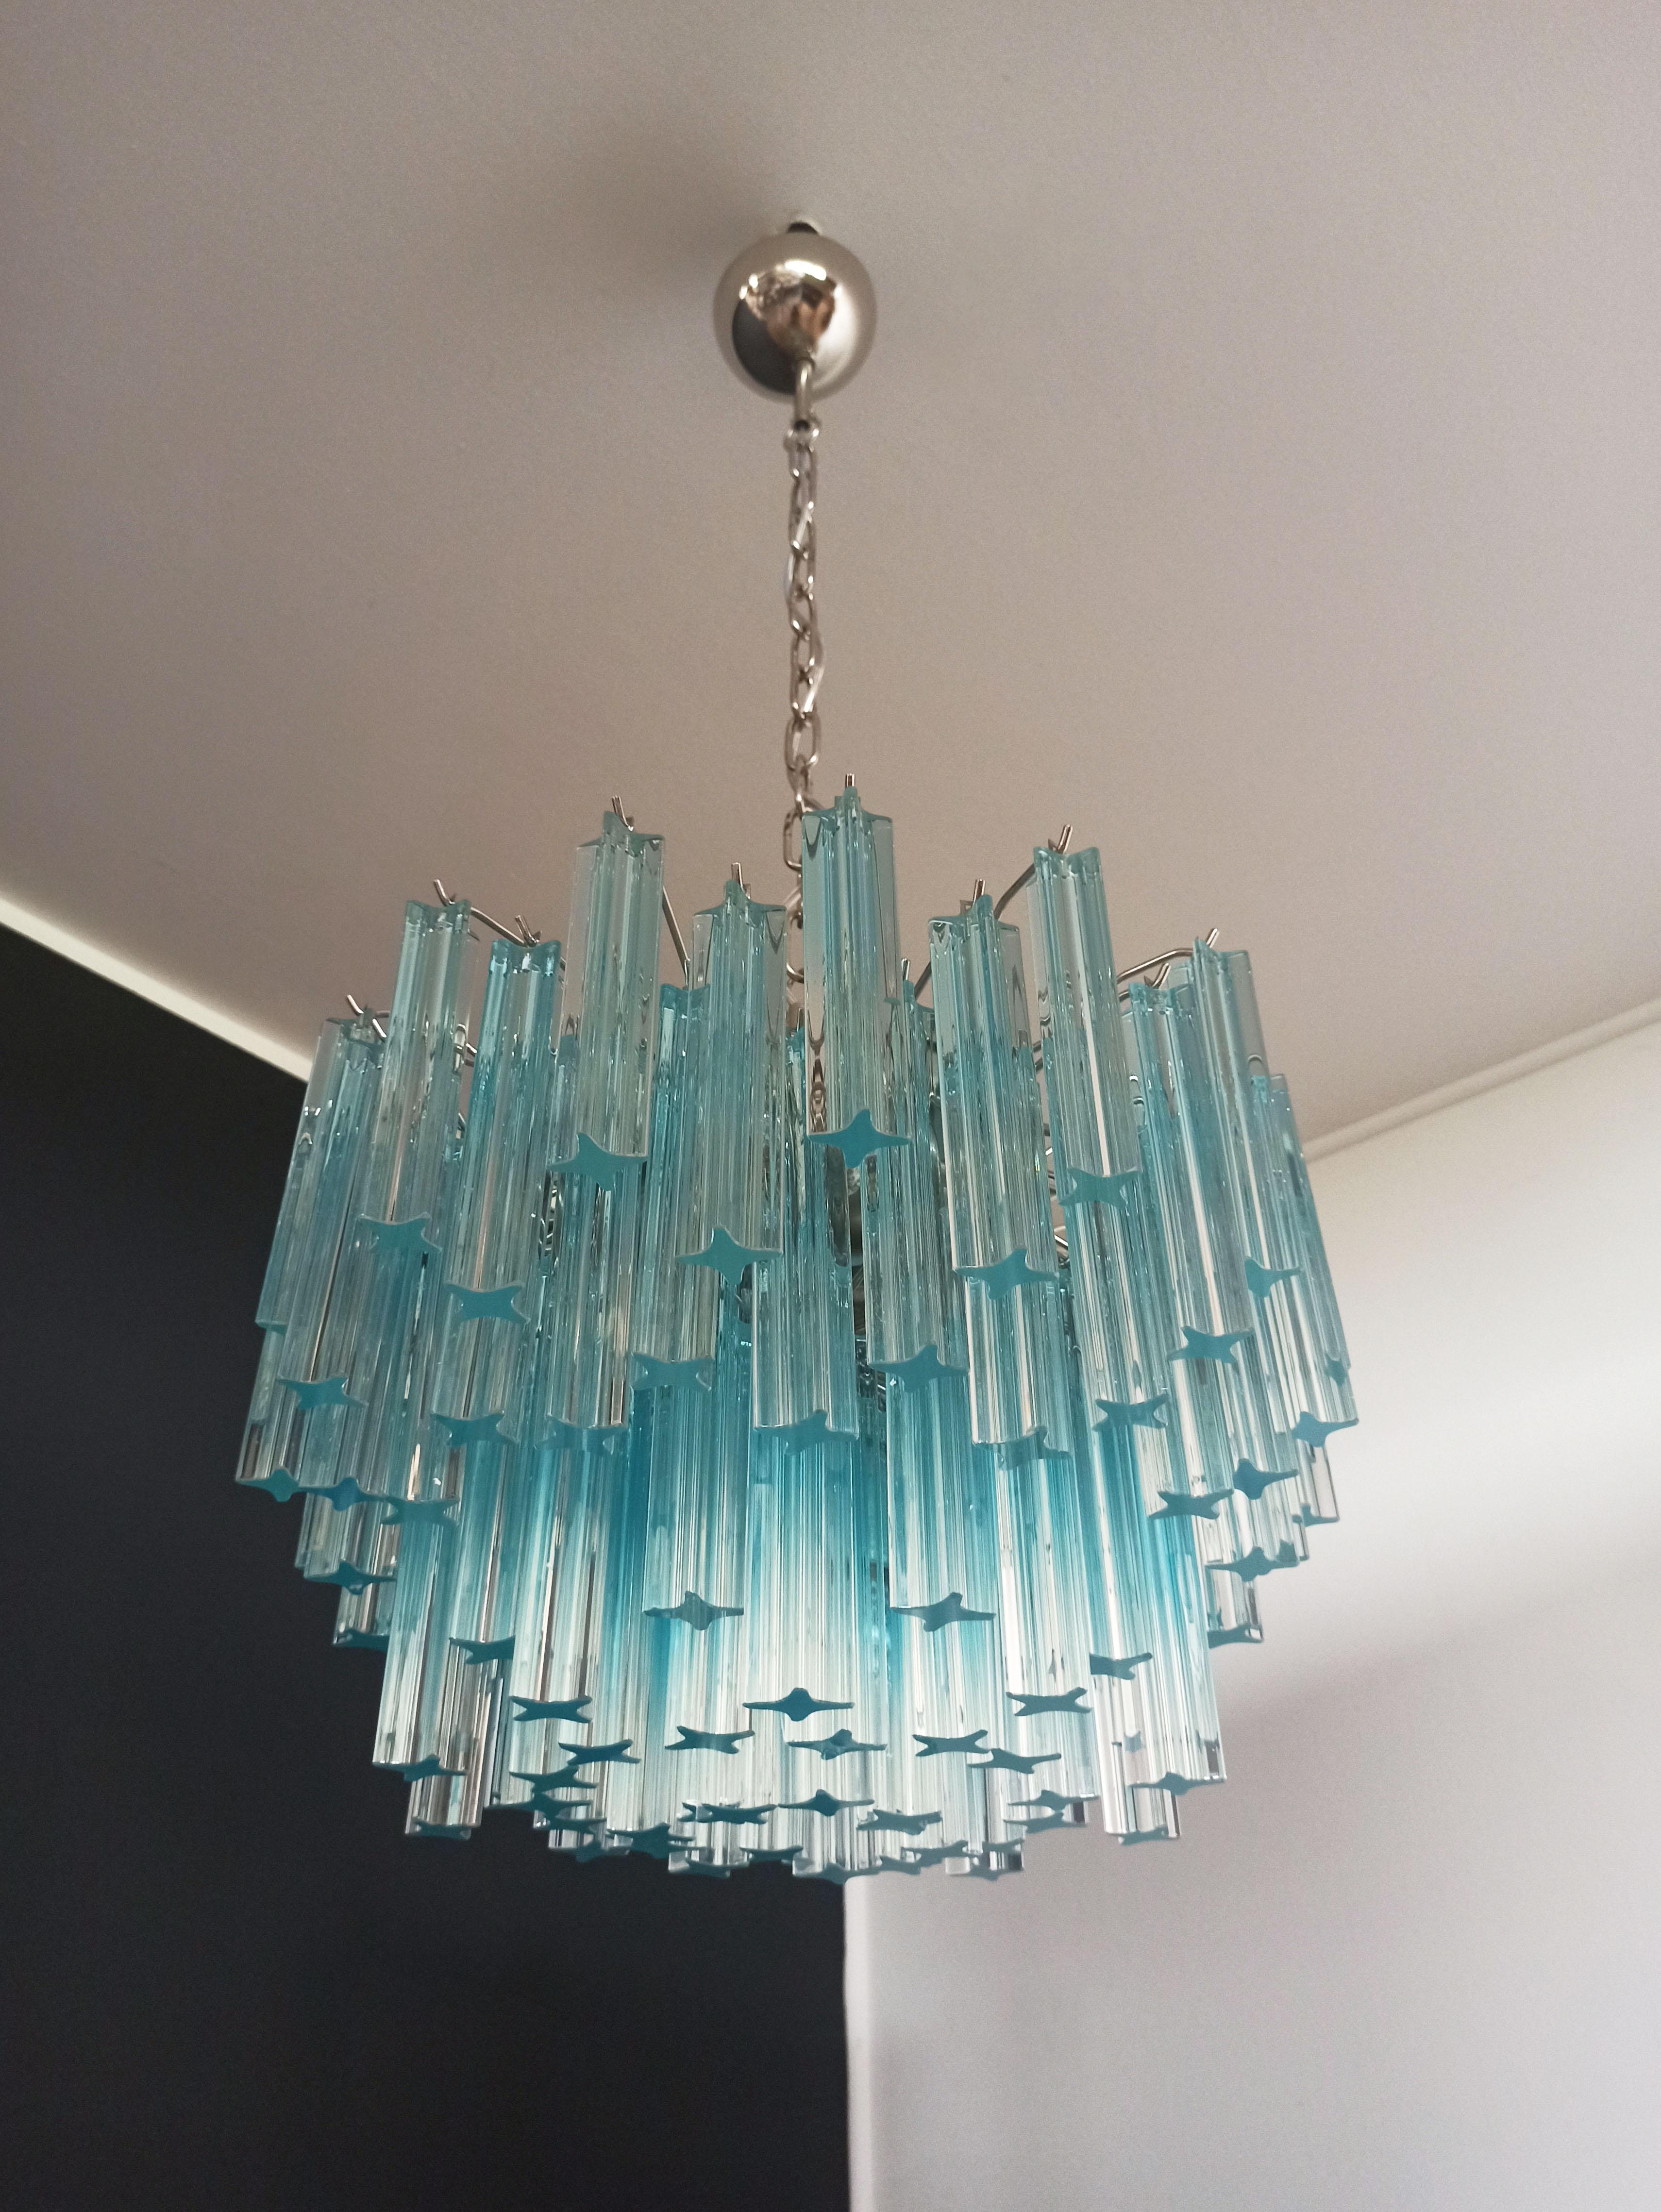 Fantastic vintage Murano chandelier made by 107 Murano crystal prism quadriedri in a nickel metal frame. The glasses: quadriedri blue shade
Period: 1980s
Dimensions: 45.25 inches height (115 cm) with chain, 15.75 inches height (40 cm) without